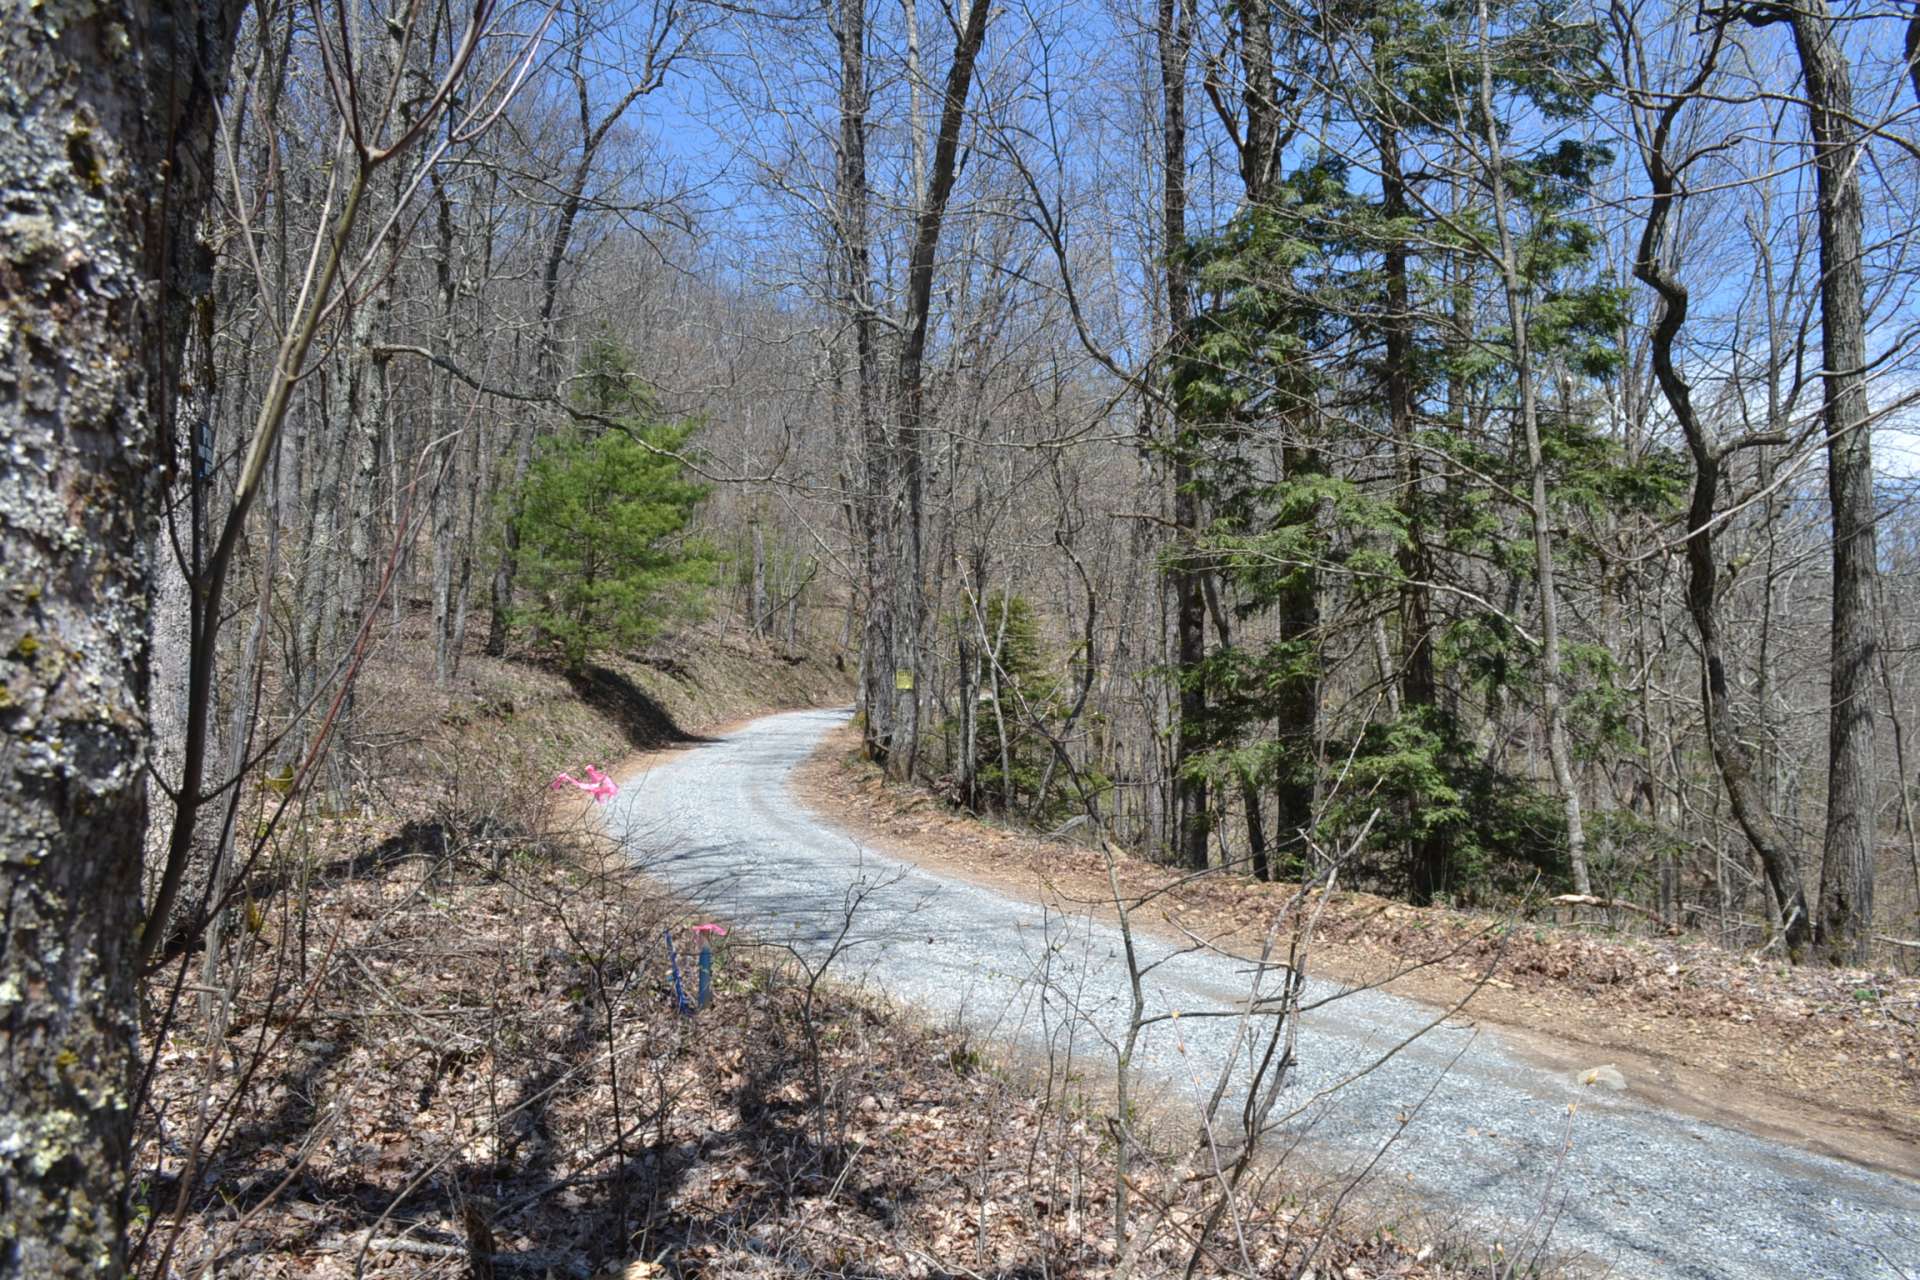 Panther Creek Road is a mountain graveled state maintained road. This is looking  to the left of the gate toward Panther Creek Rd.